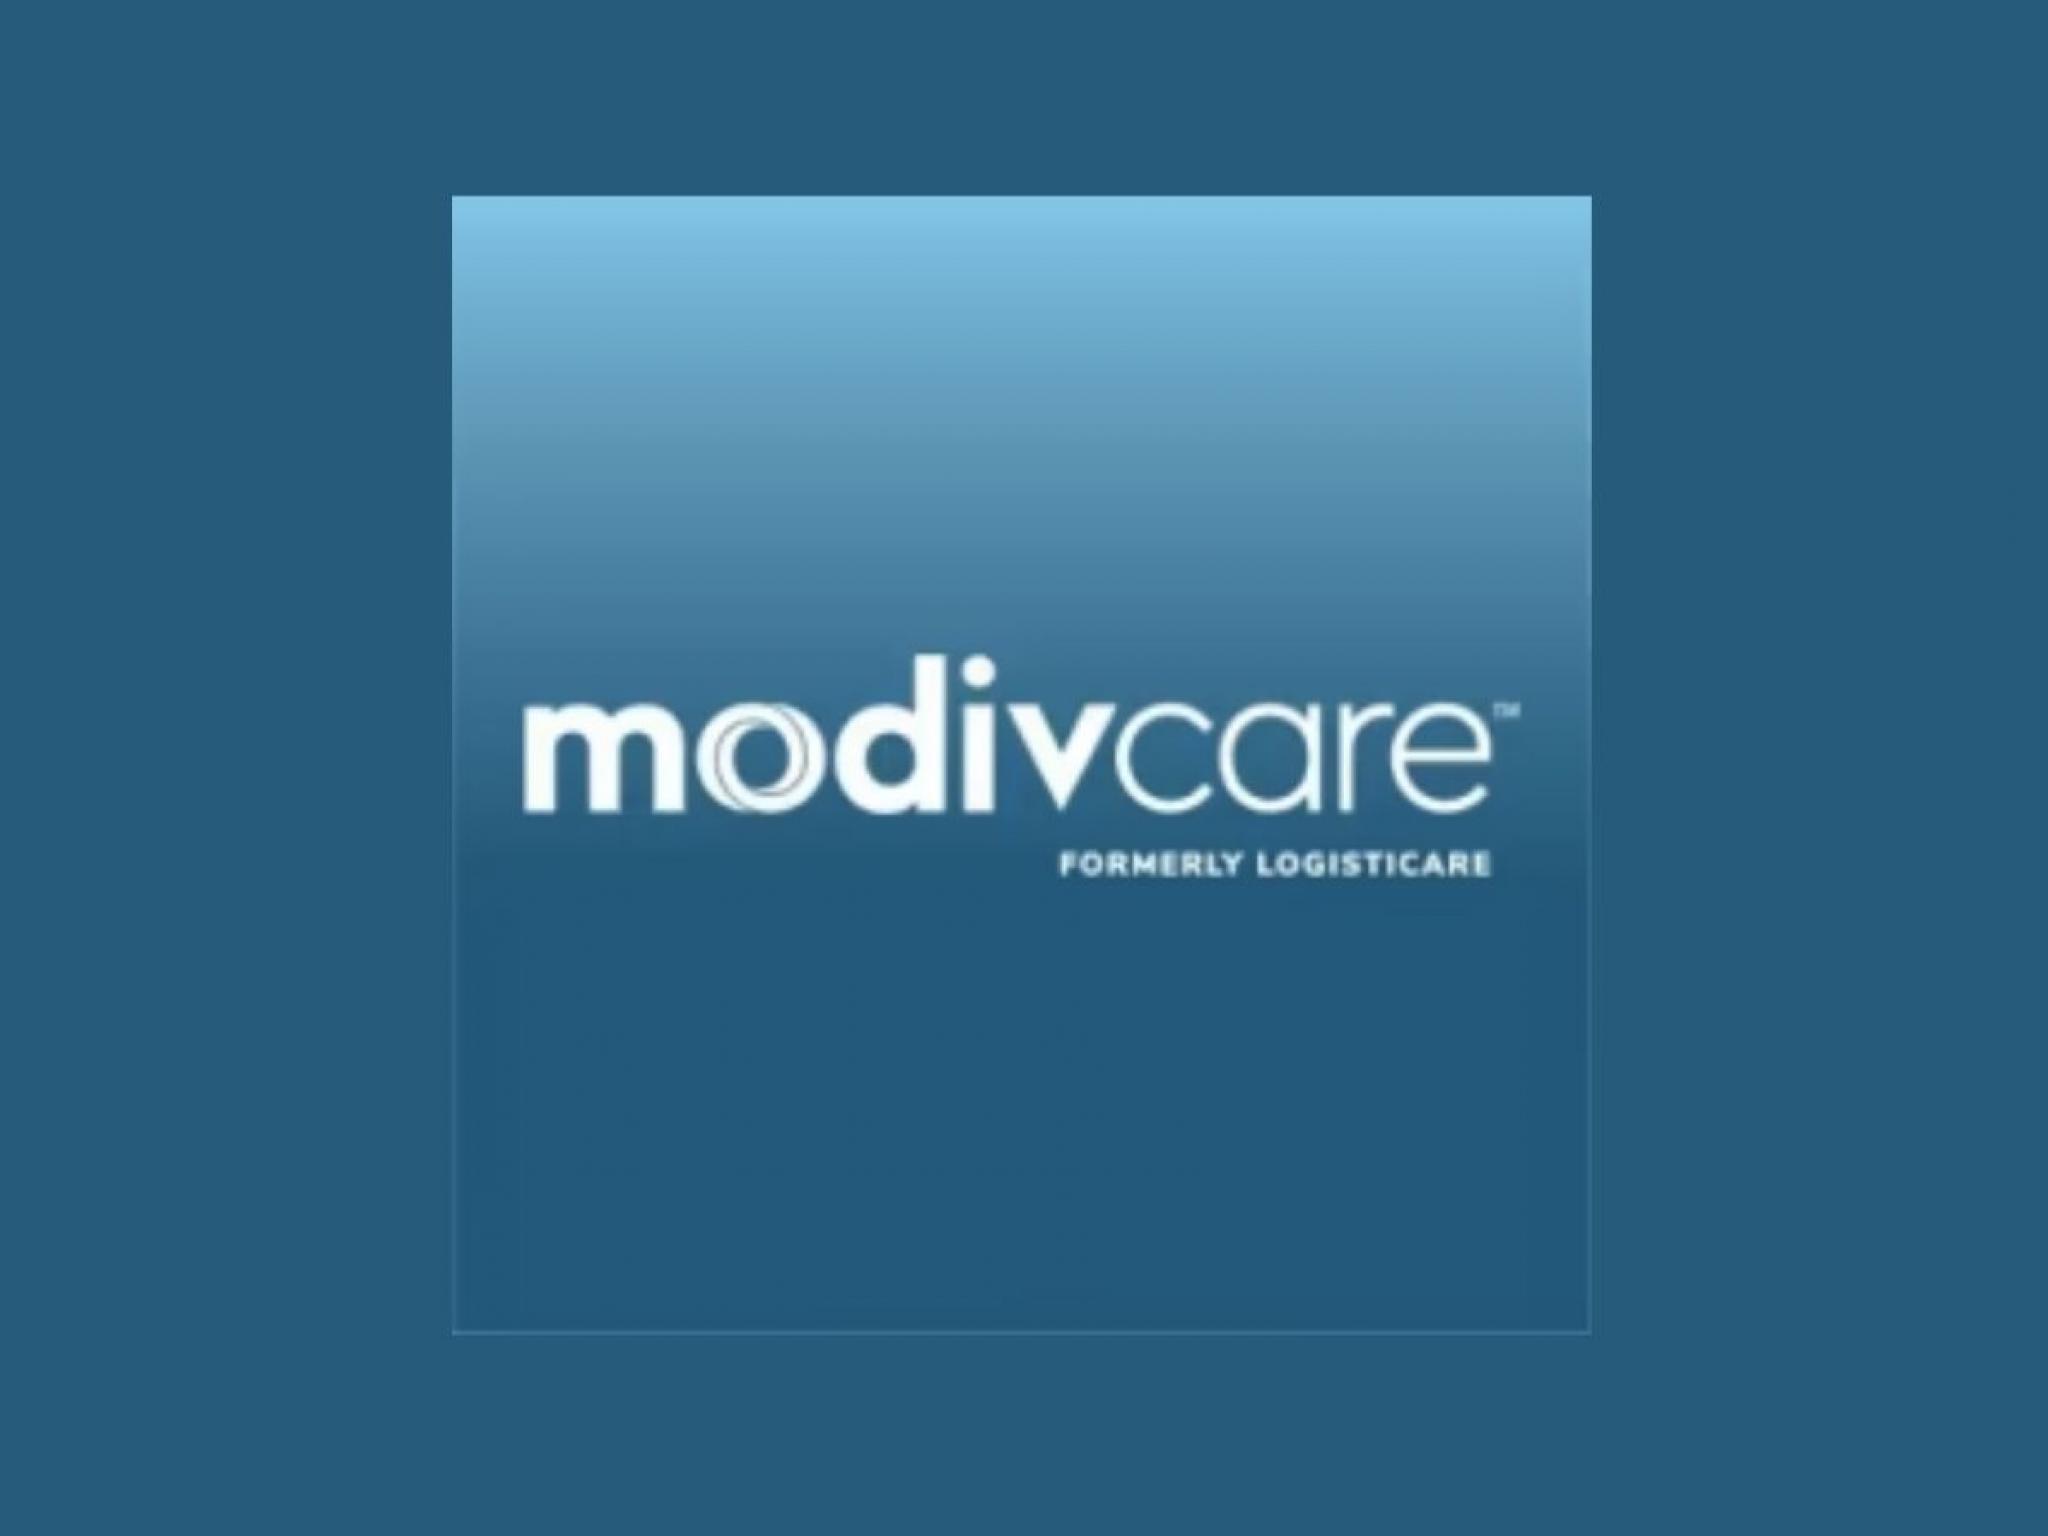  47m-bet-on-modivcare-check-out-these-3-stocks-insiders-are-buying 